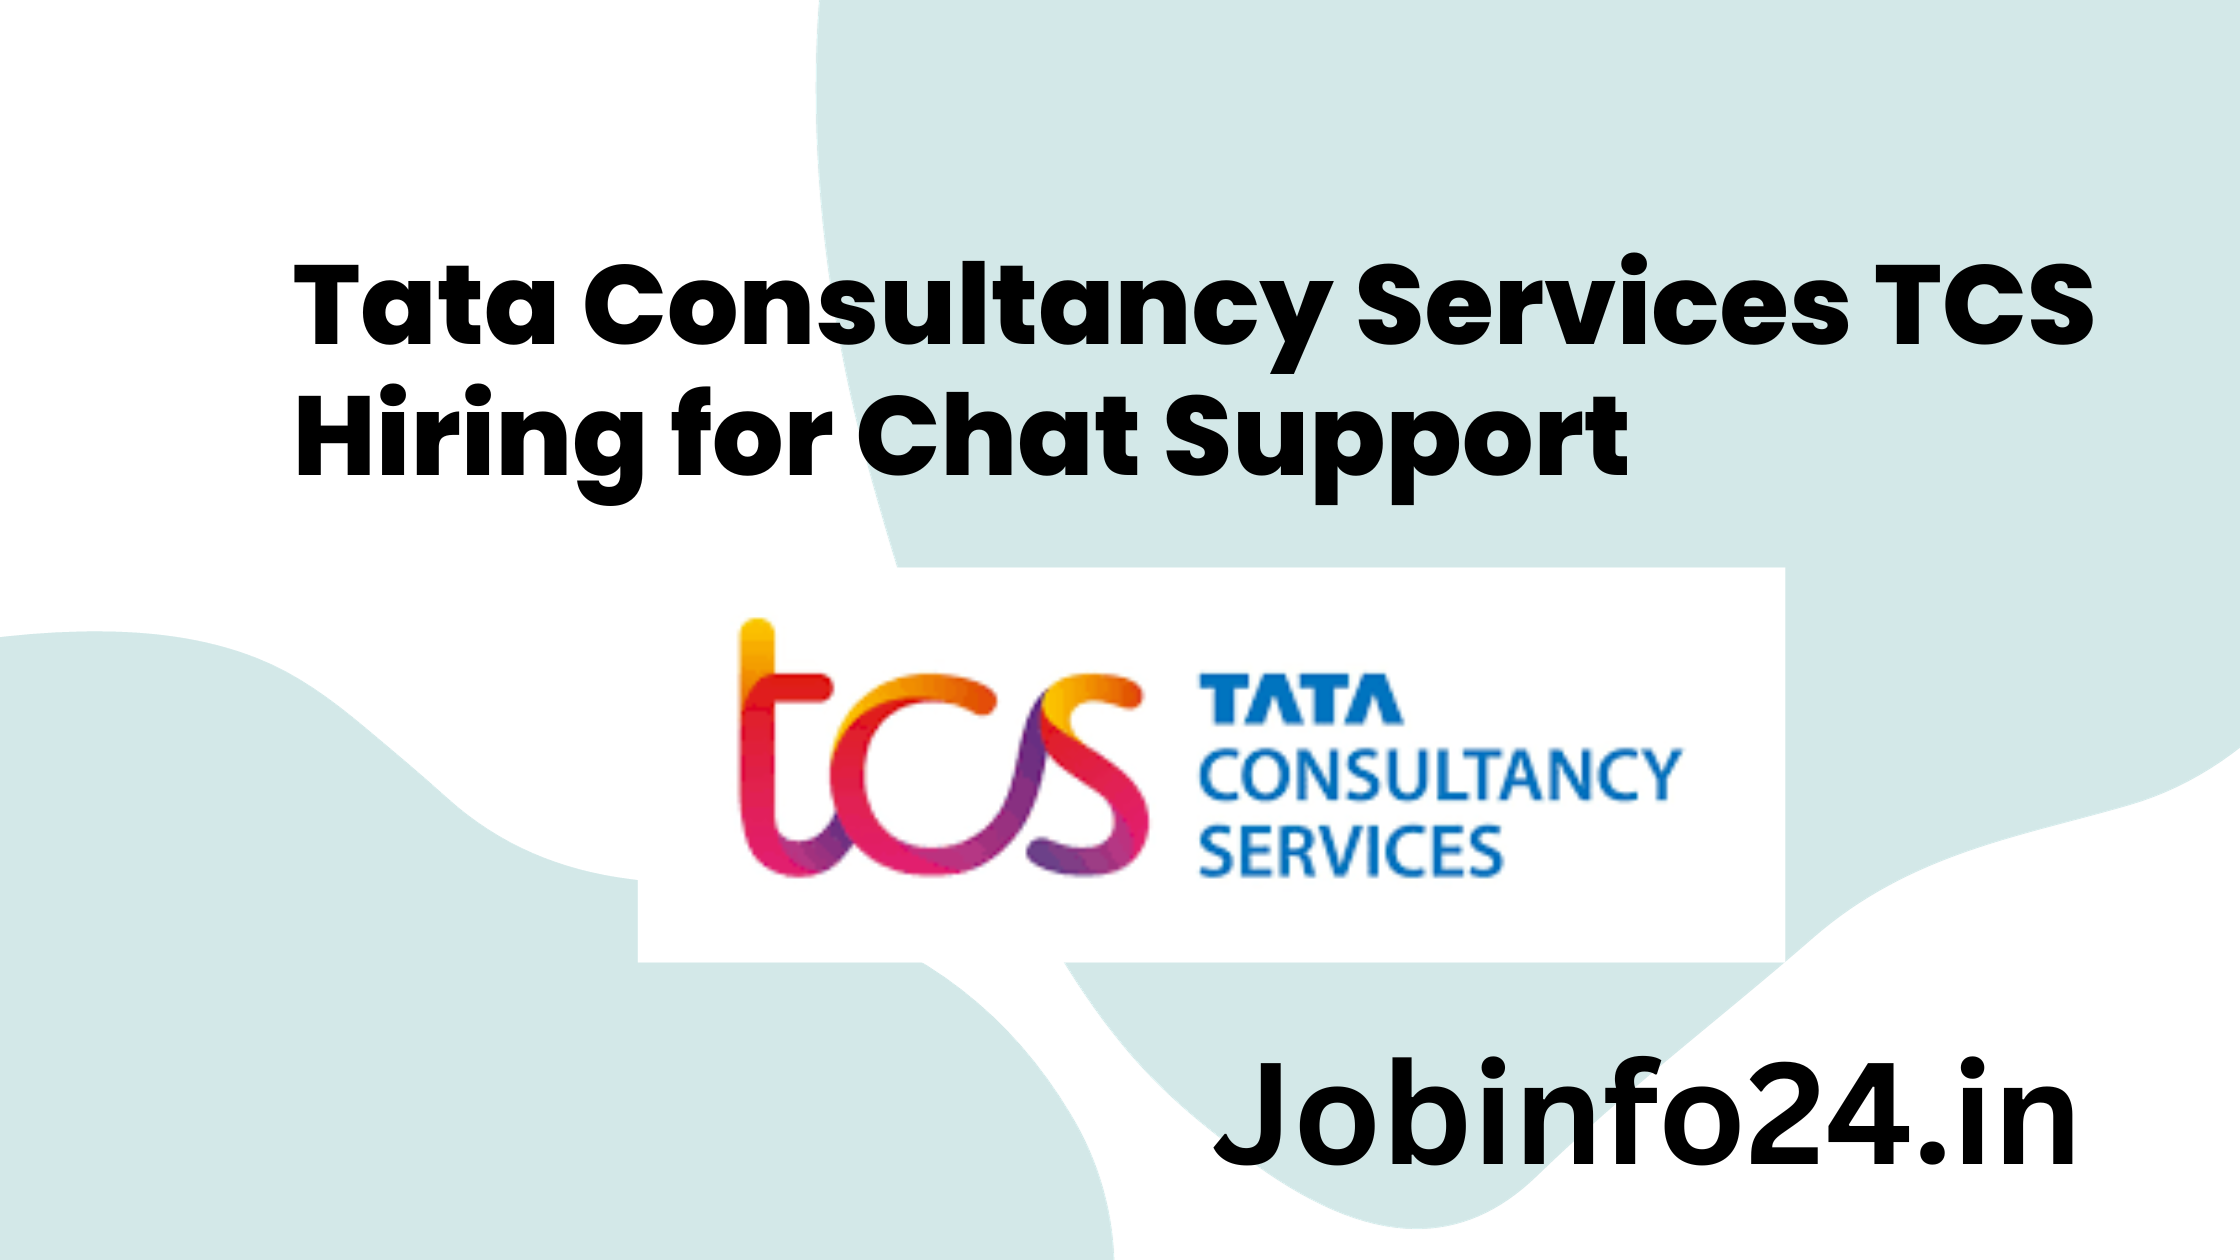 Tata Consultancy Services TCS Hiring for Chat Support